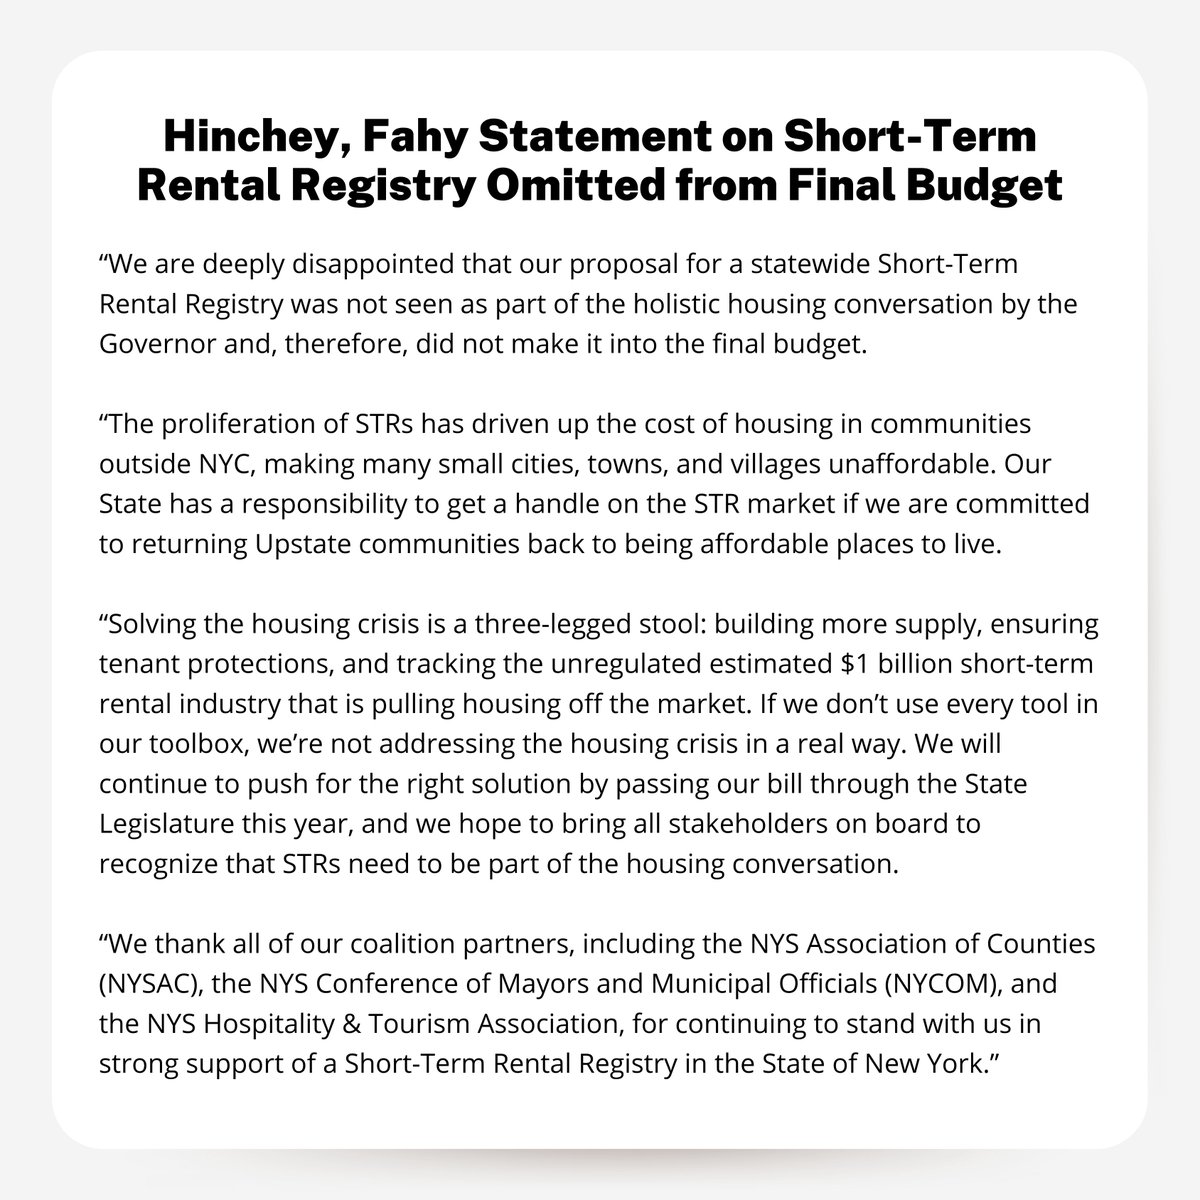 In order to fully solve the housing crisis, we must also address the proliferation of short-term rentals across our upstate communities, which was unfortunately excluded from this year's budget. Read my statement with @PatriciaFahy109: